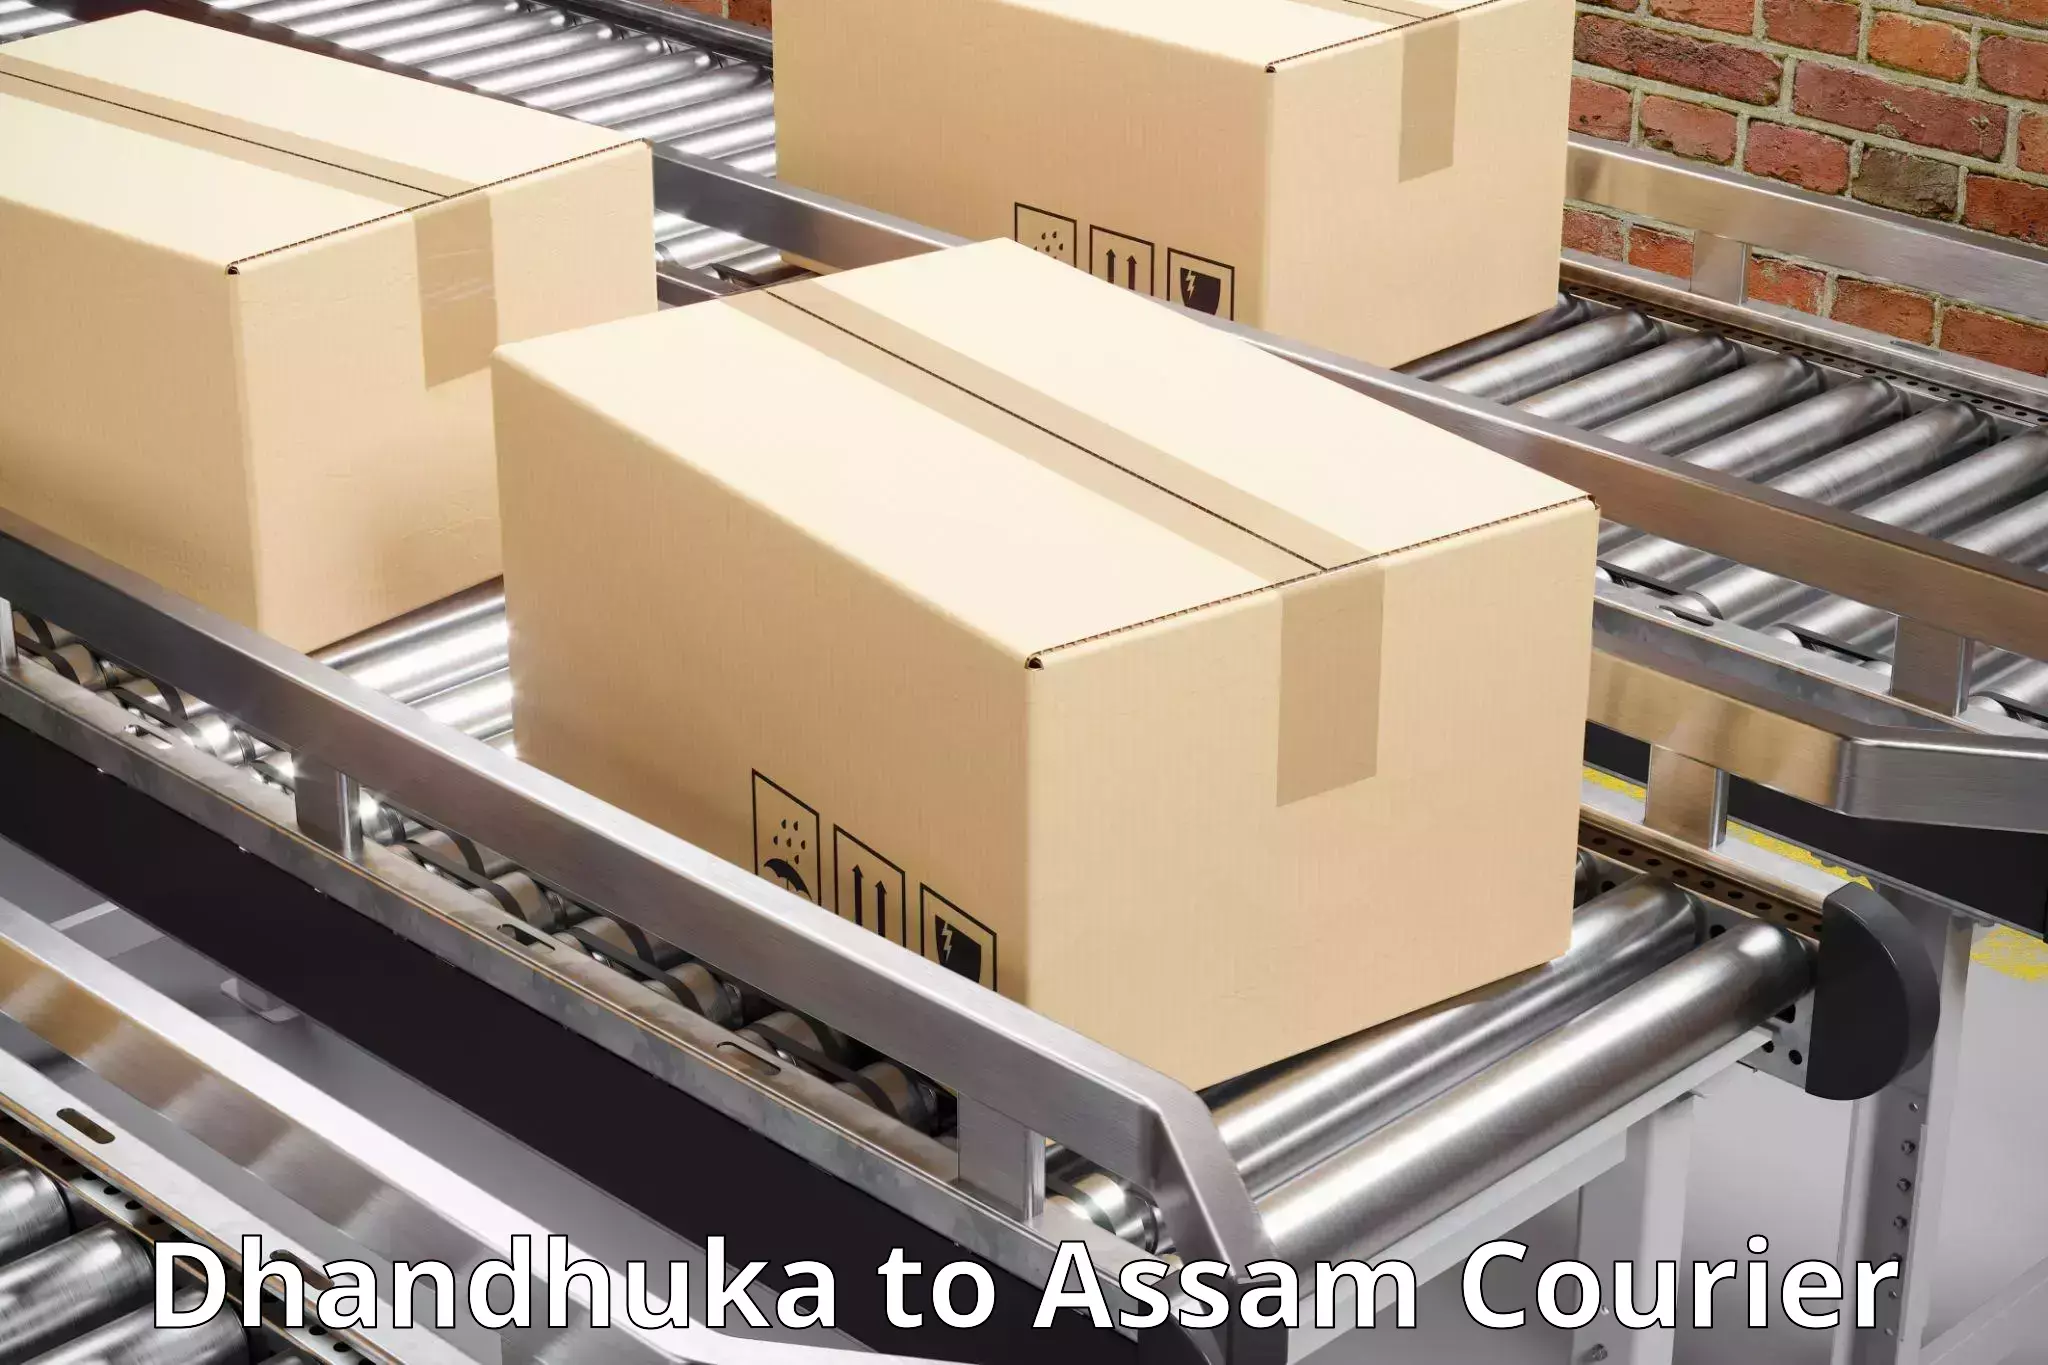 Courier service booking in Dhandhuka to Kampur